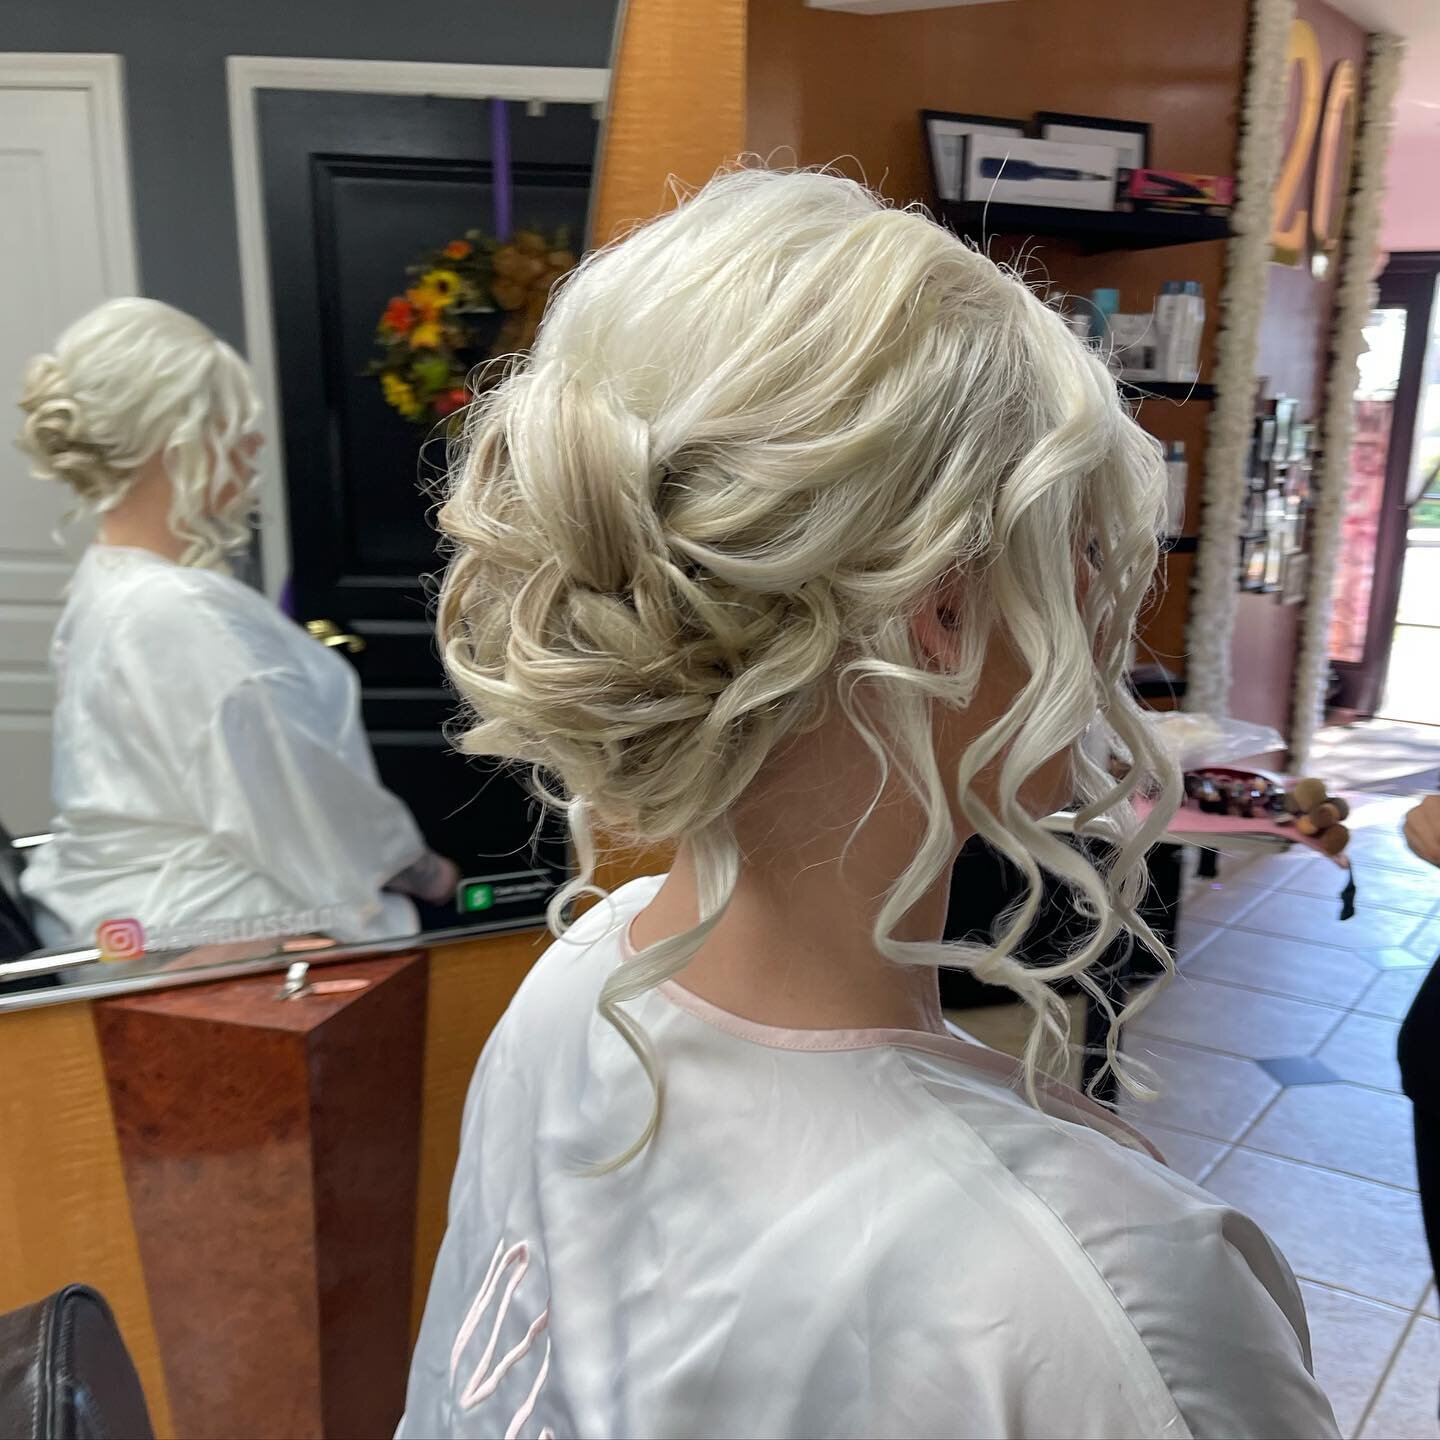 BRIDAL HAIR 💫

✨ Gabriellas x Lashes By Gab Glam Squad ✨

Ready to service you and your bridal party at our salon or at your destination for your special day. 

We are available for local, a few hours away or out of state weddings. We are fully equi